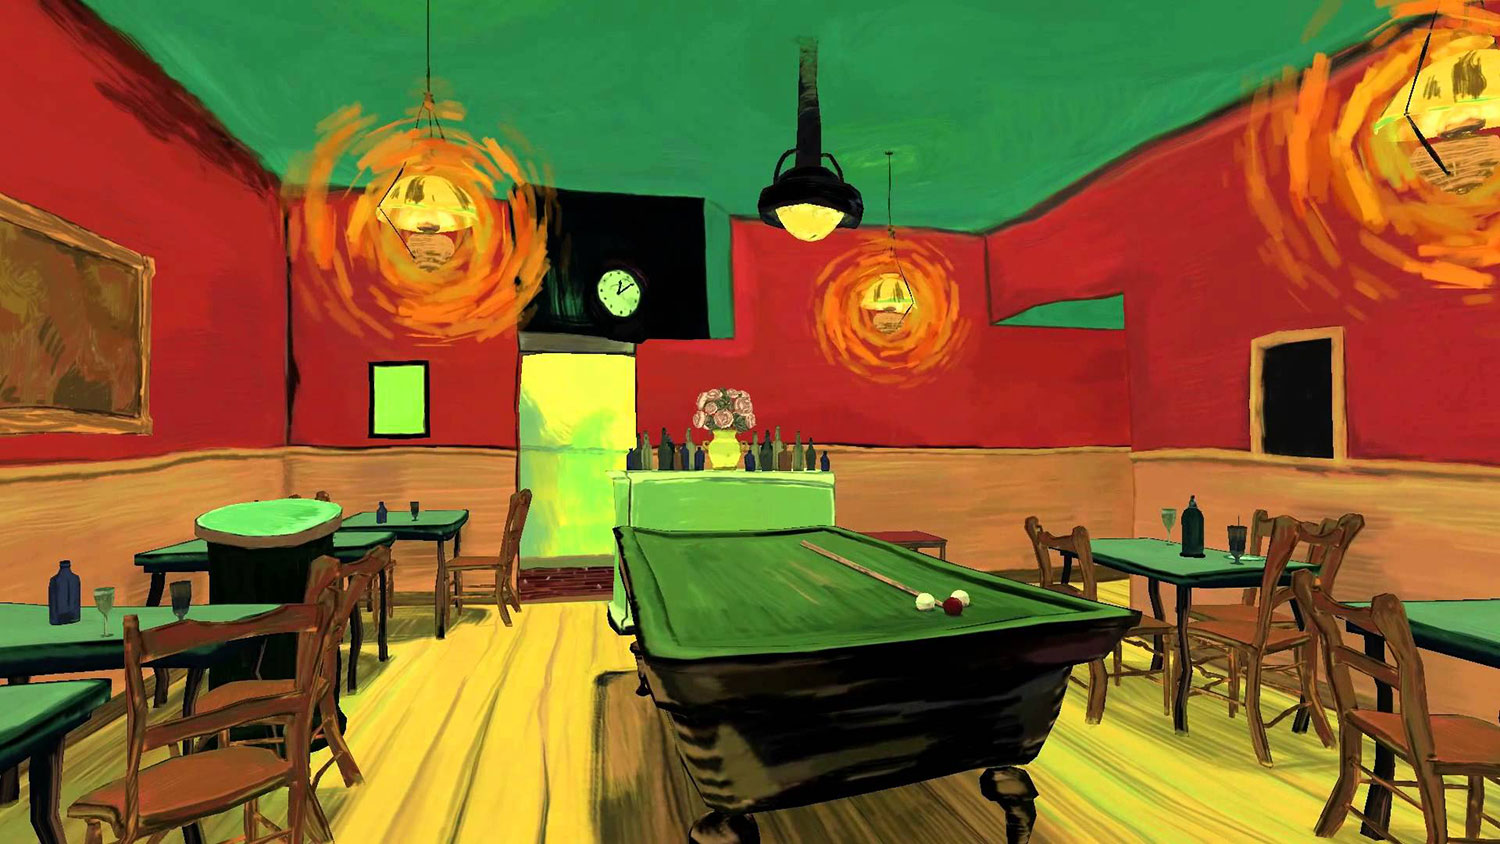 jack in and freak out the weirdest oculus rift software so far night cafe  an immersive tribute to vincent van gogh